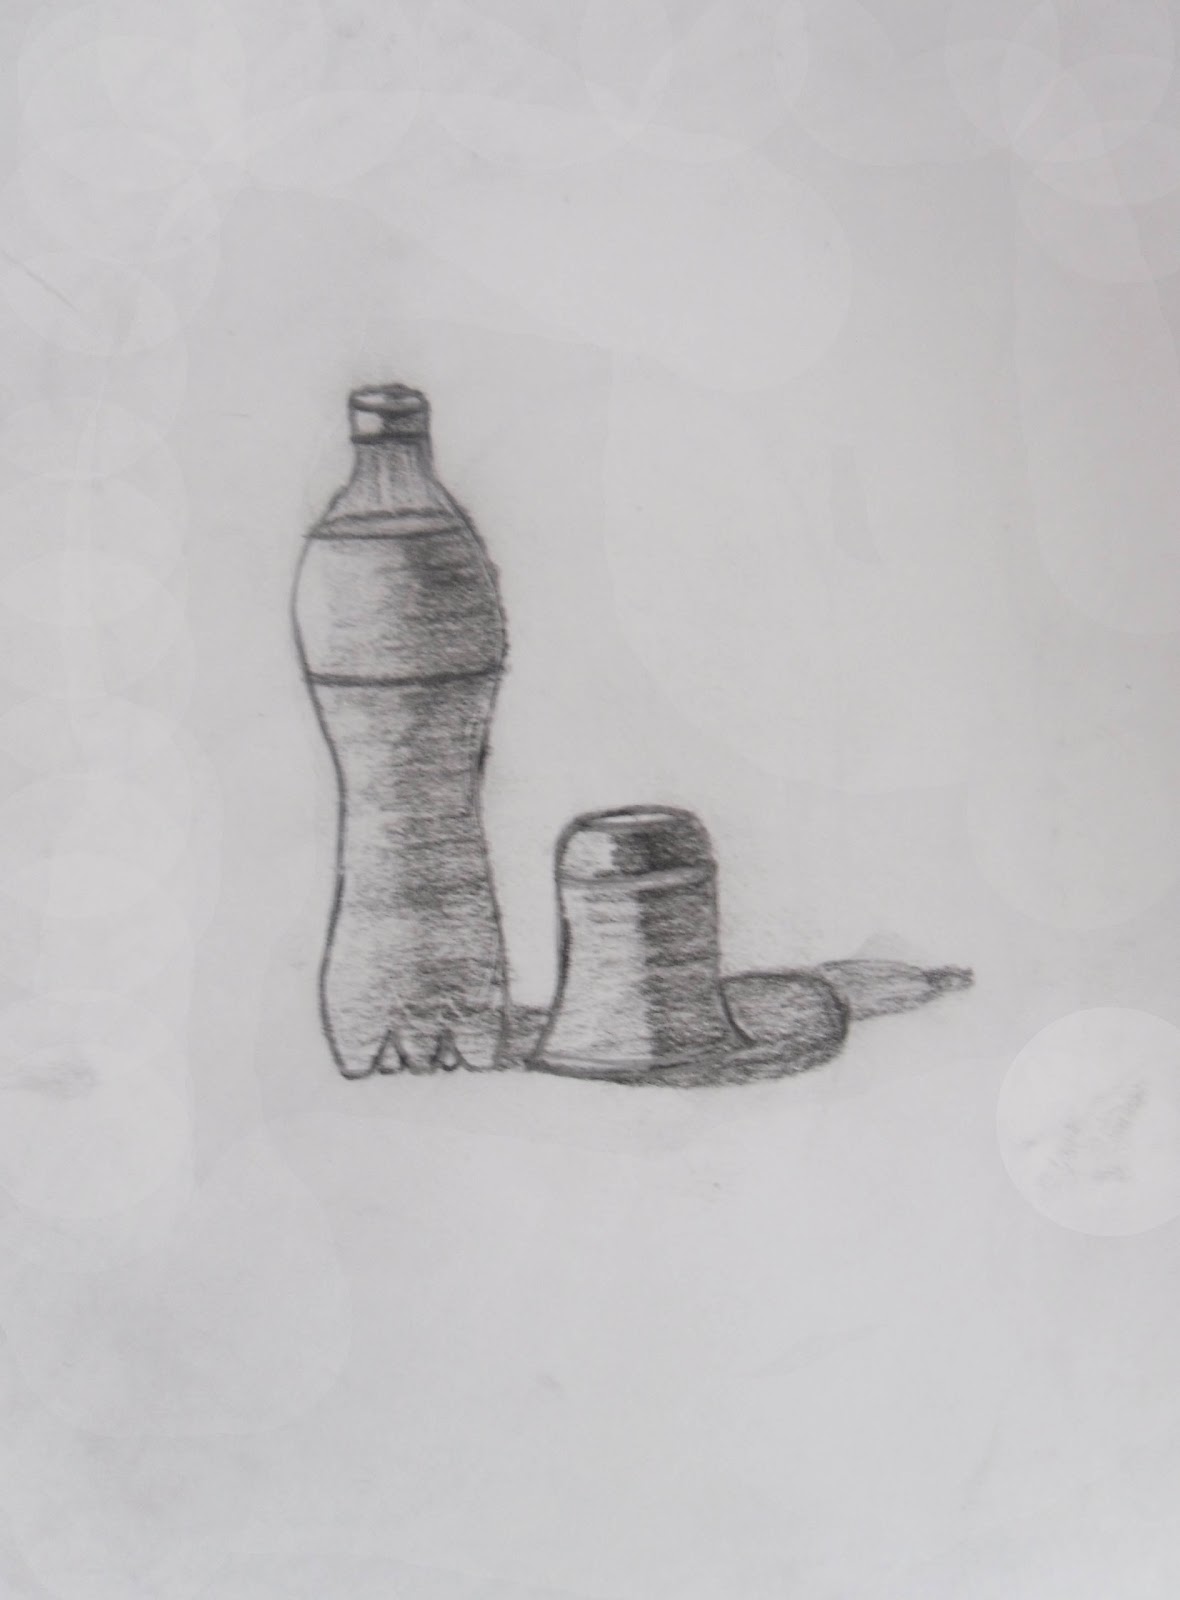 Creative Object Drawing Sketching for Kindergarten